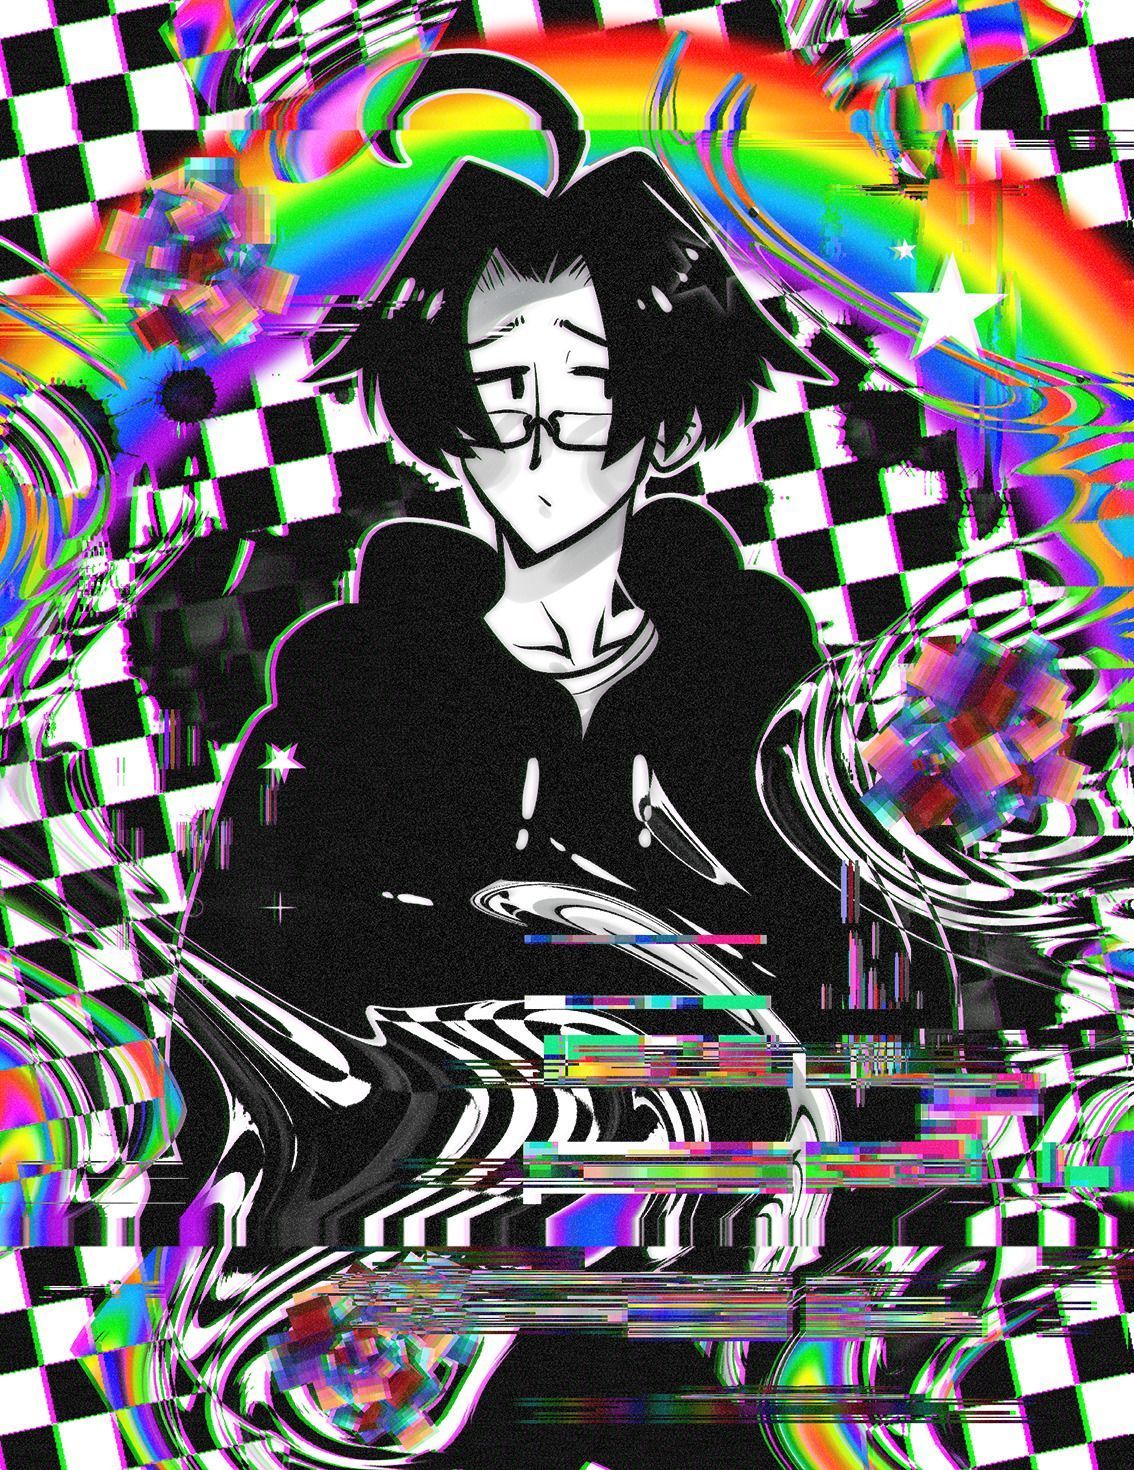 Aesthetic anime boy wallpaper for phone and desktop. - Internetcore, webcore